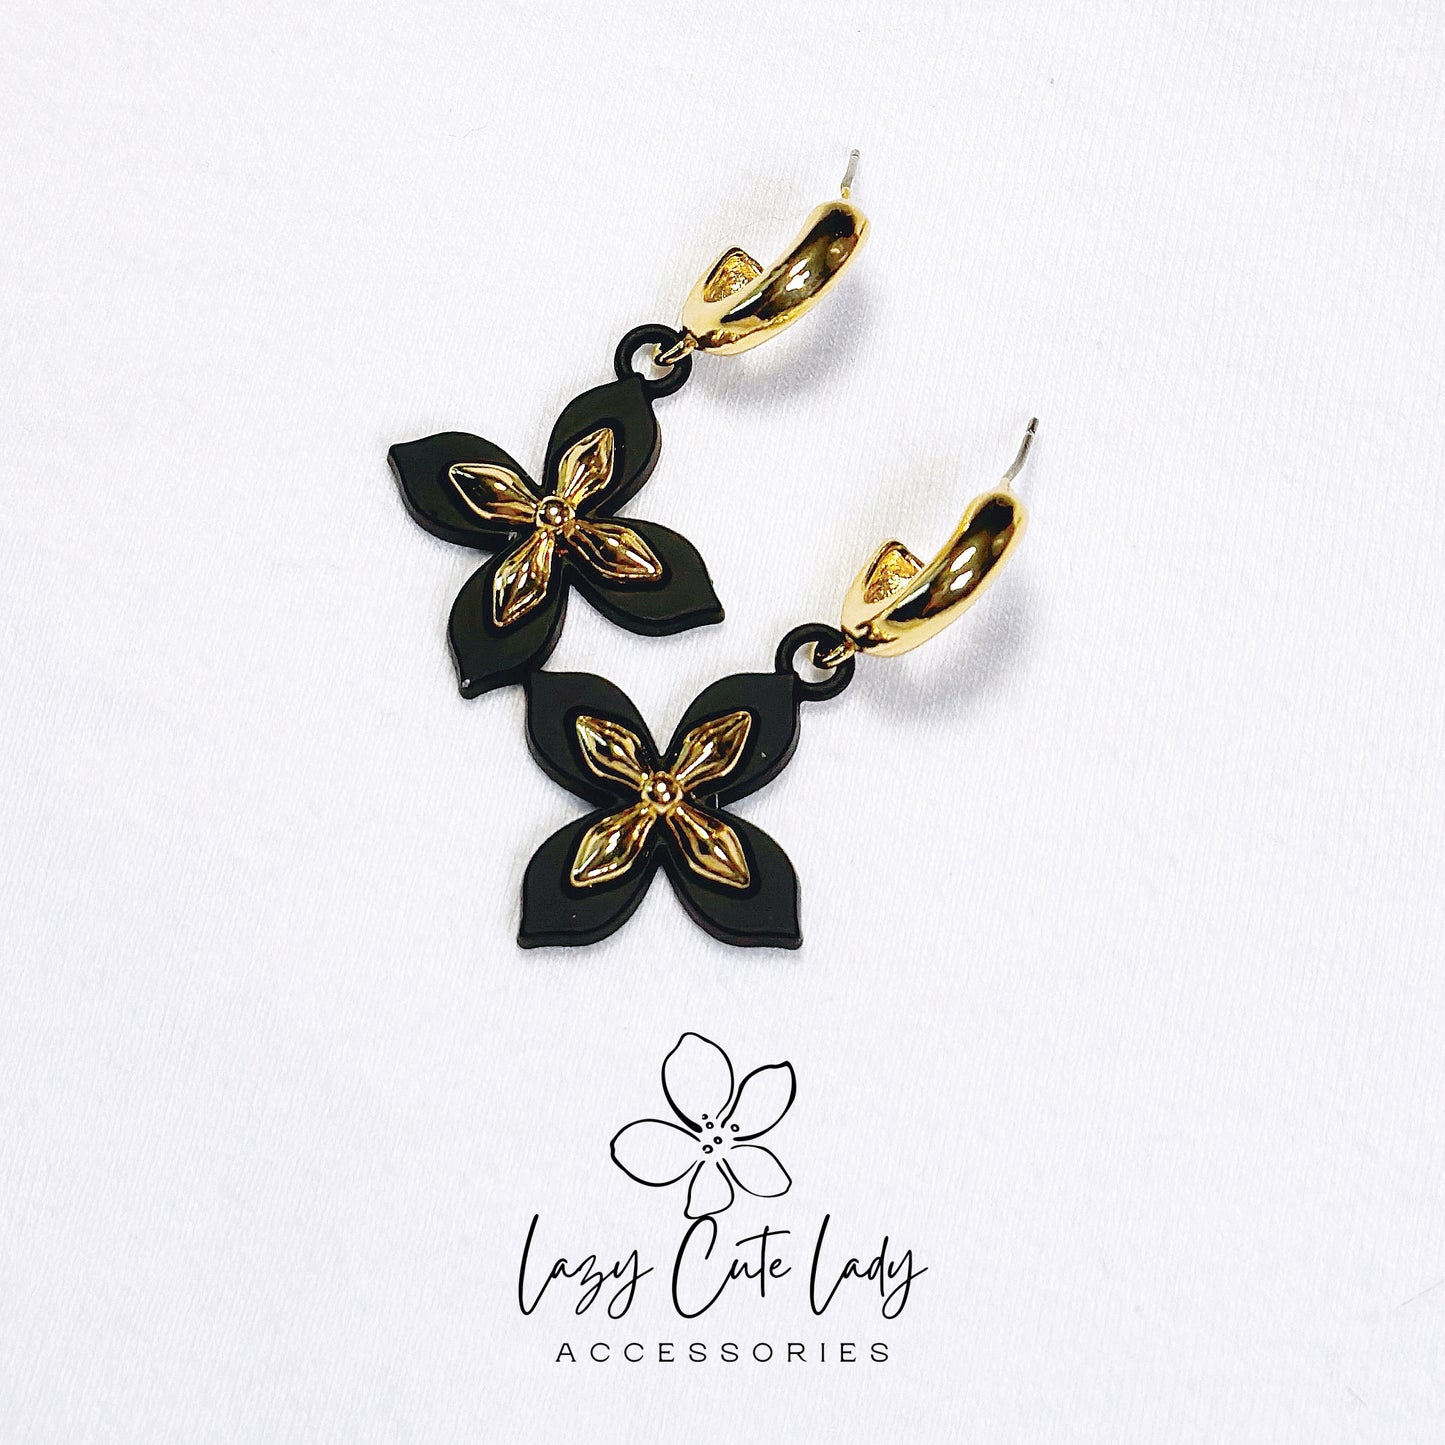 Lazy Cute Lady Accessories-Elegant Bloom: Black and Gold Cross Flower Earrings - Gift - for girl for women